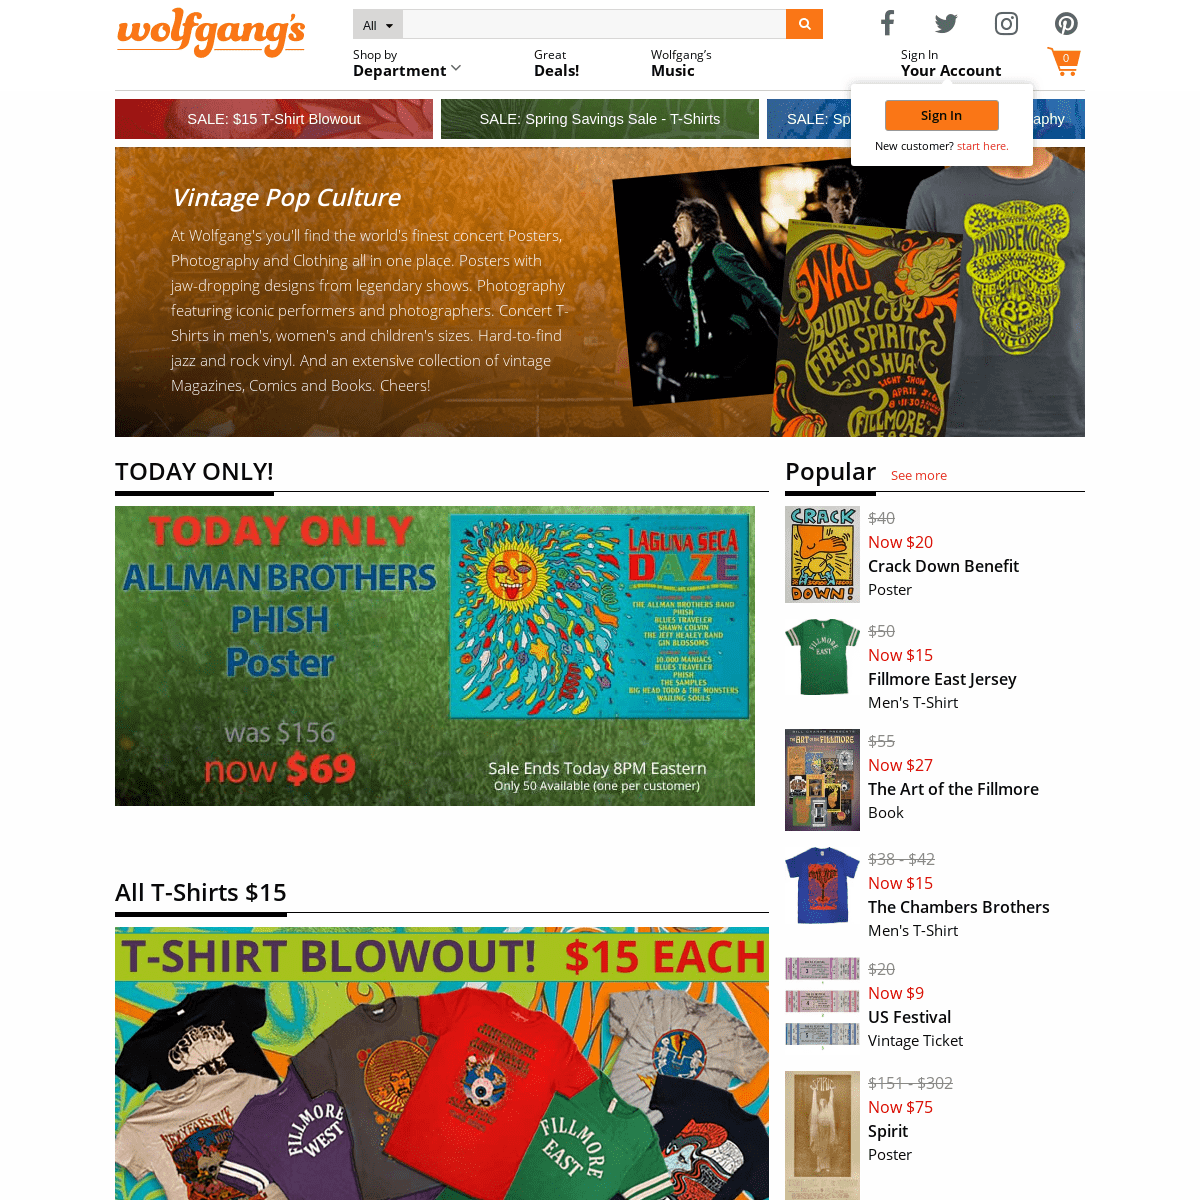 A complete backup of wolfgangs.com